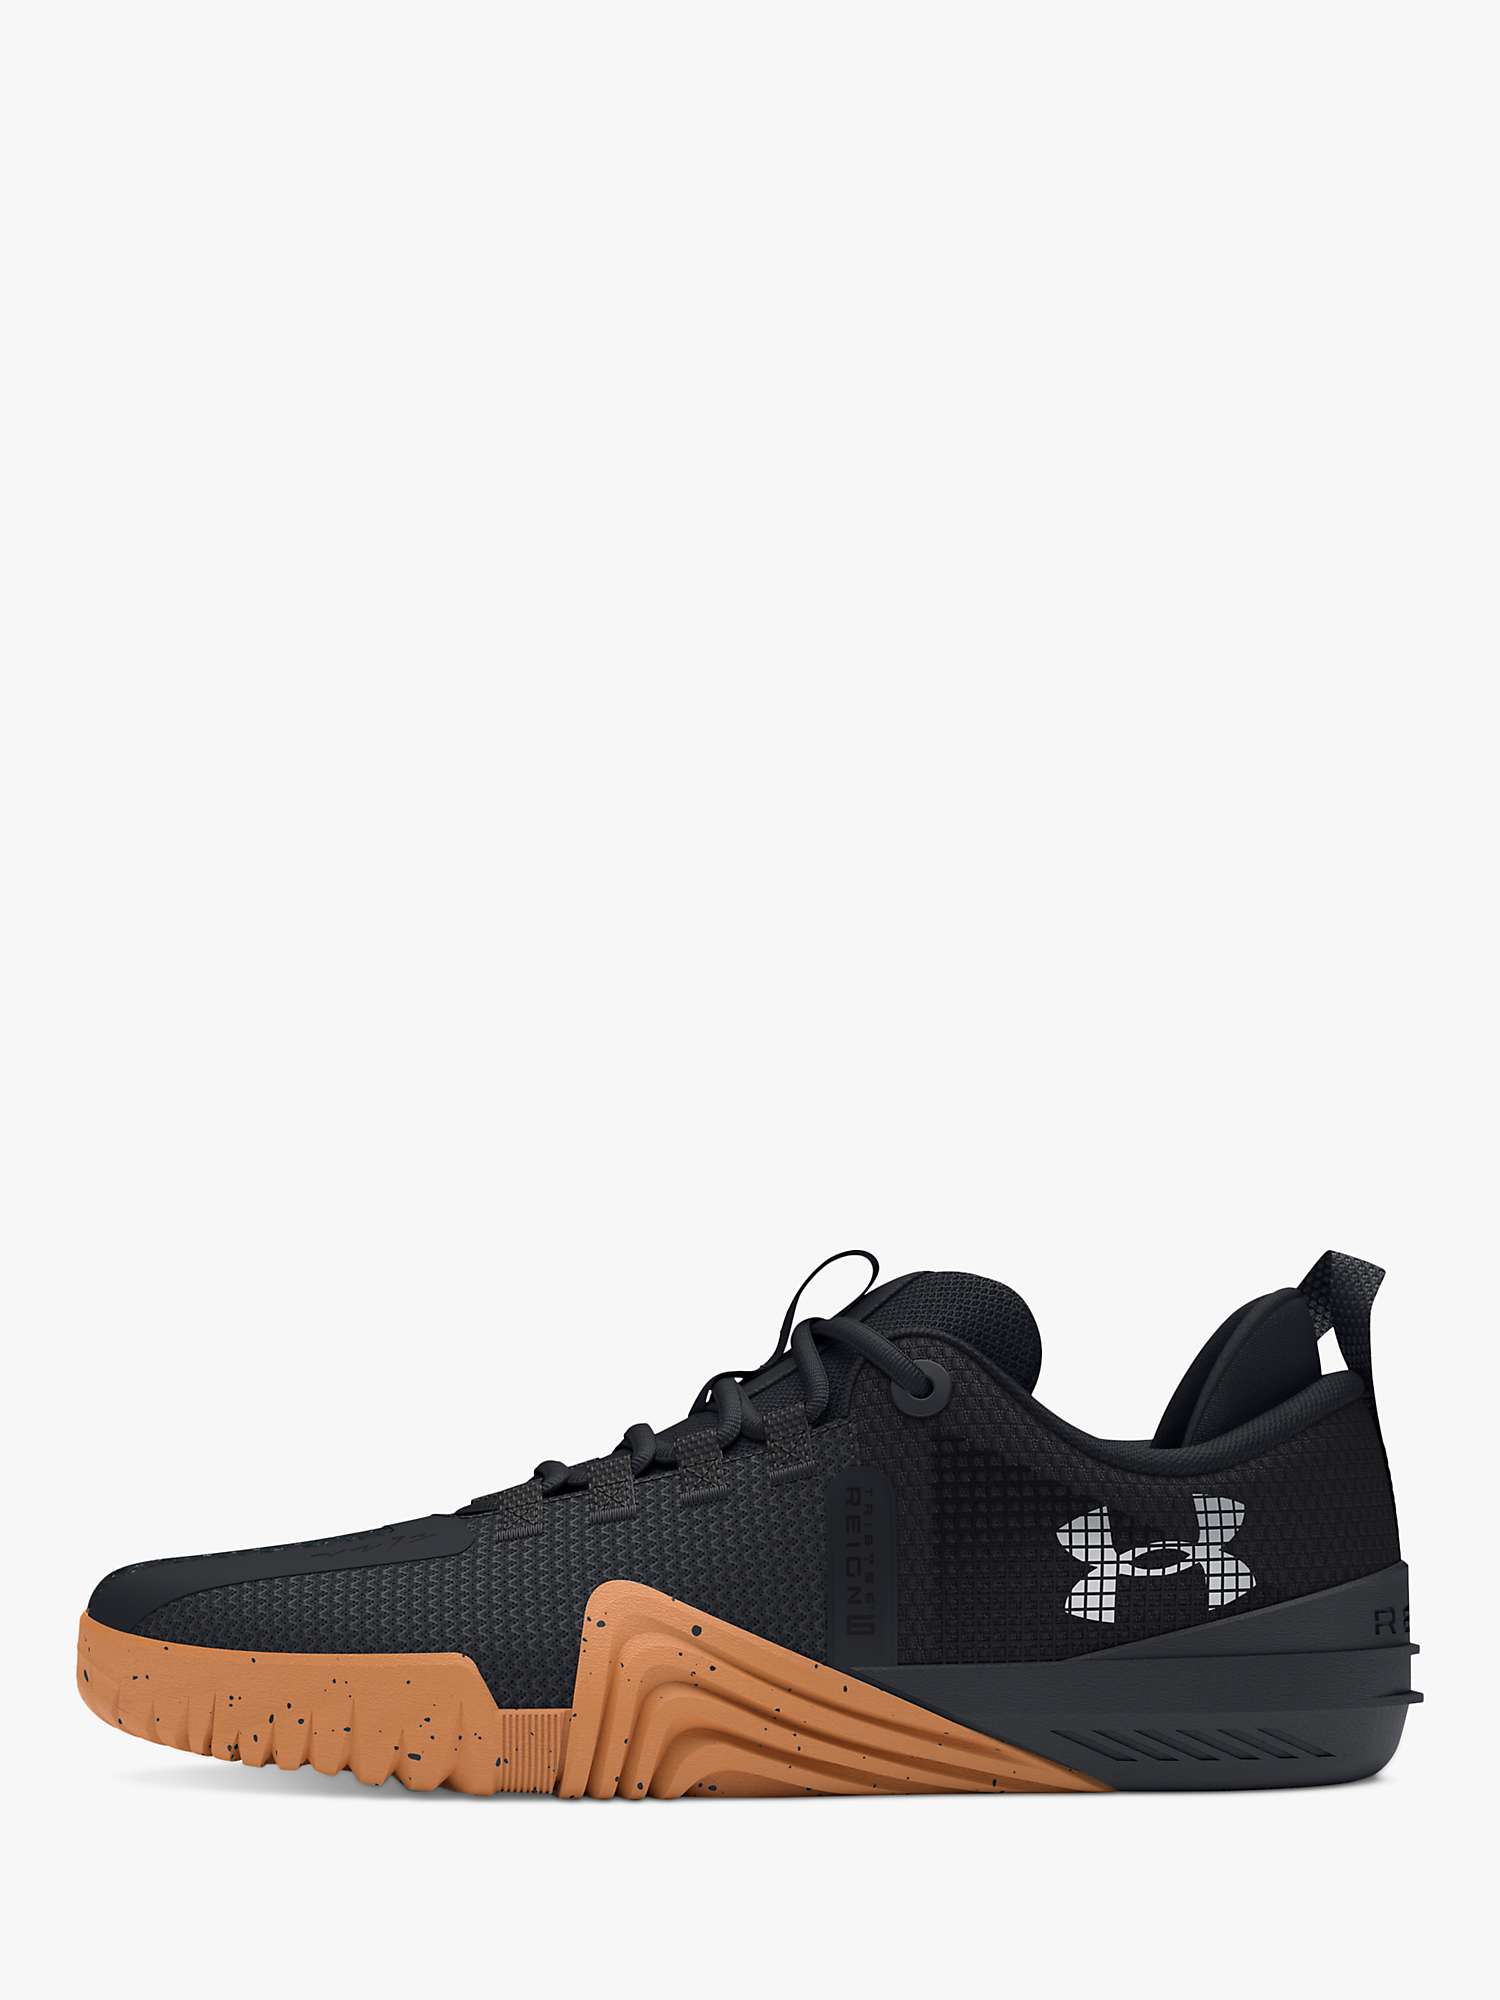 Buy Under Armour Reign 6 Training Shoes, Black/Silver Online at johnlewis.com